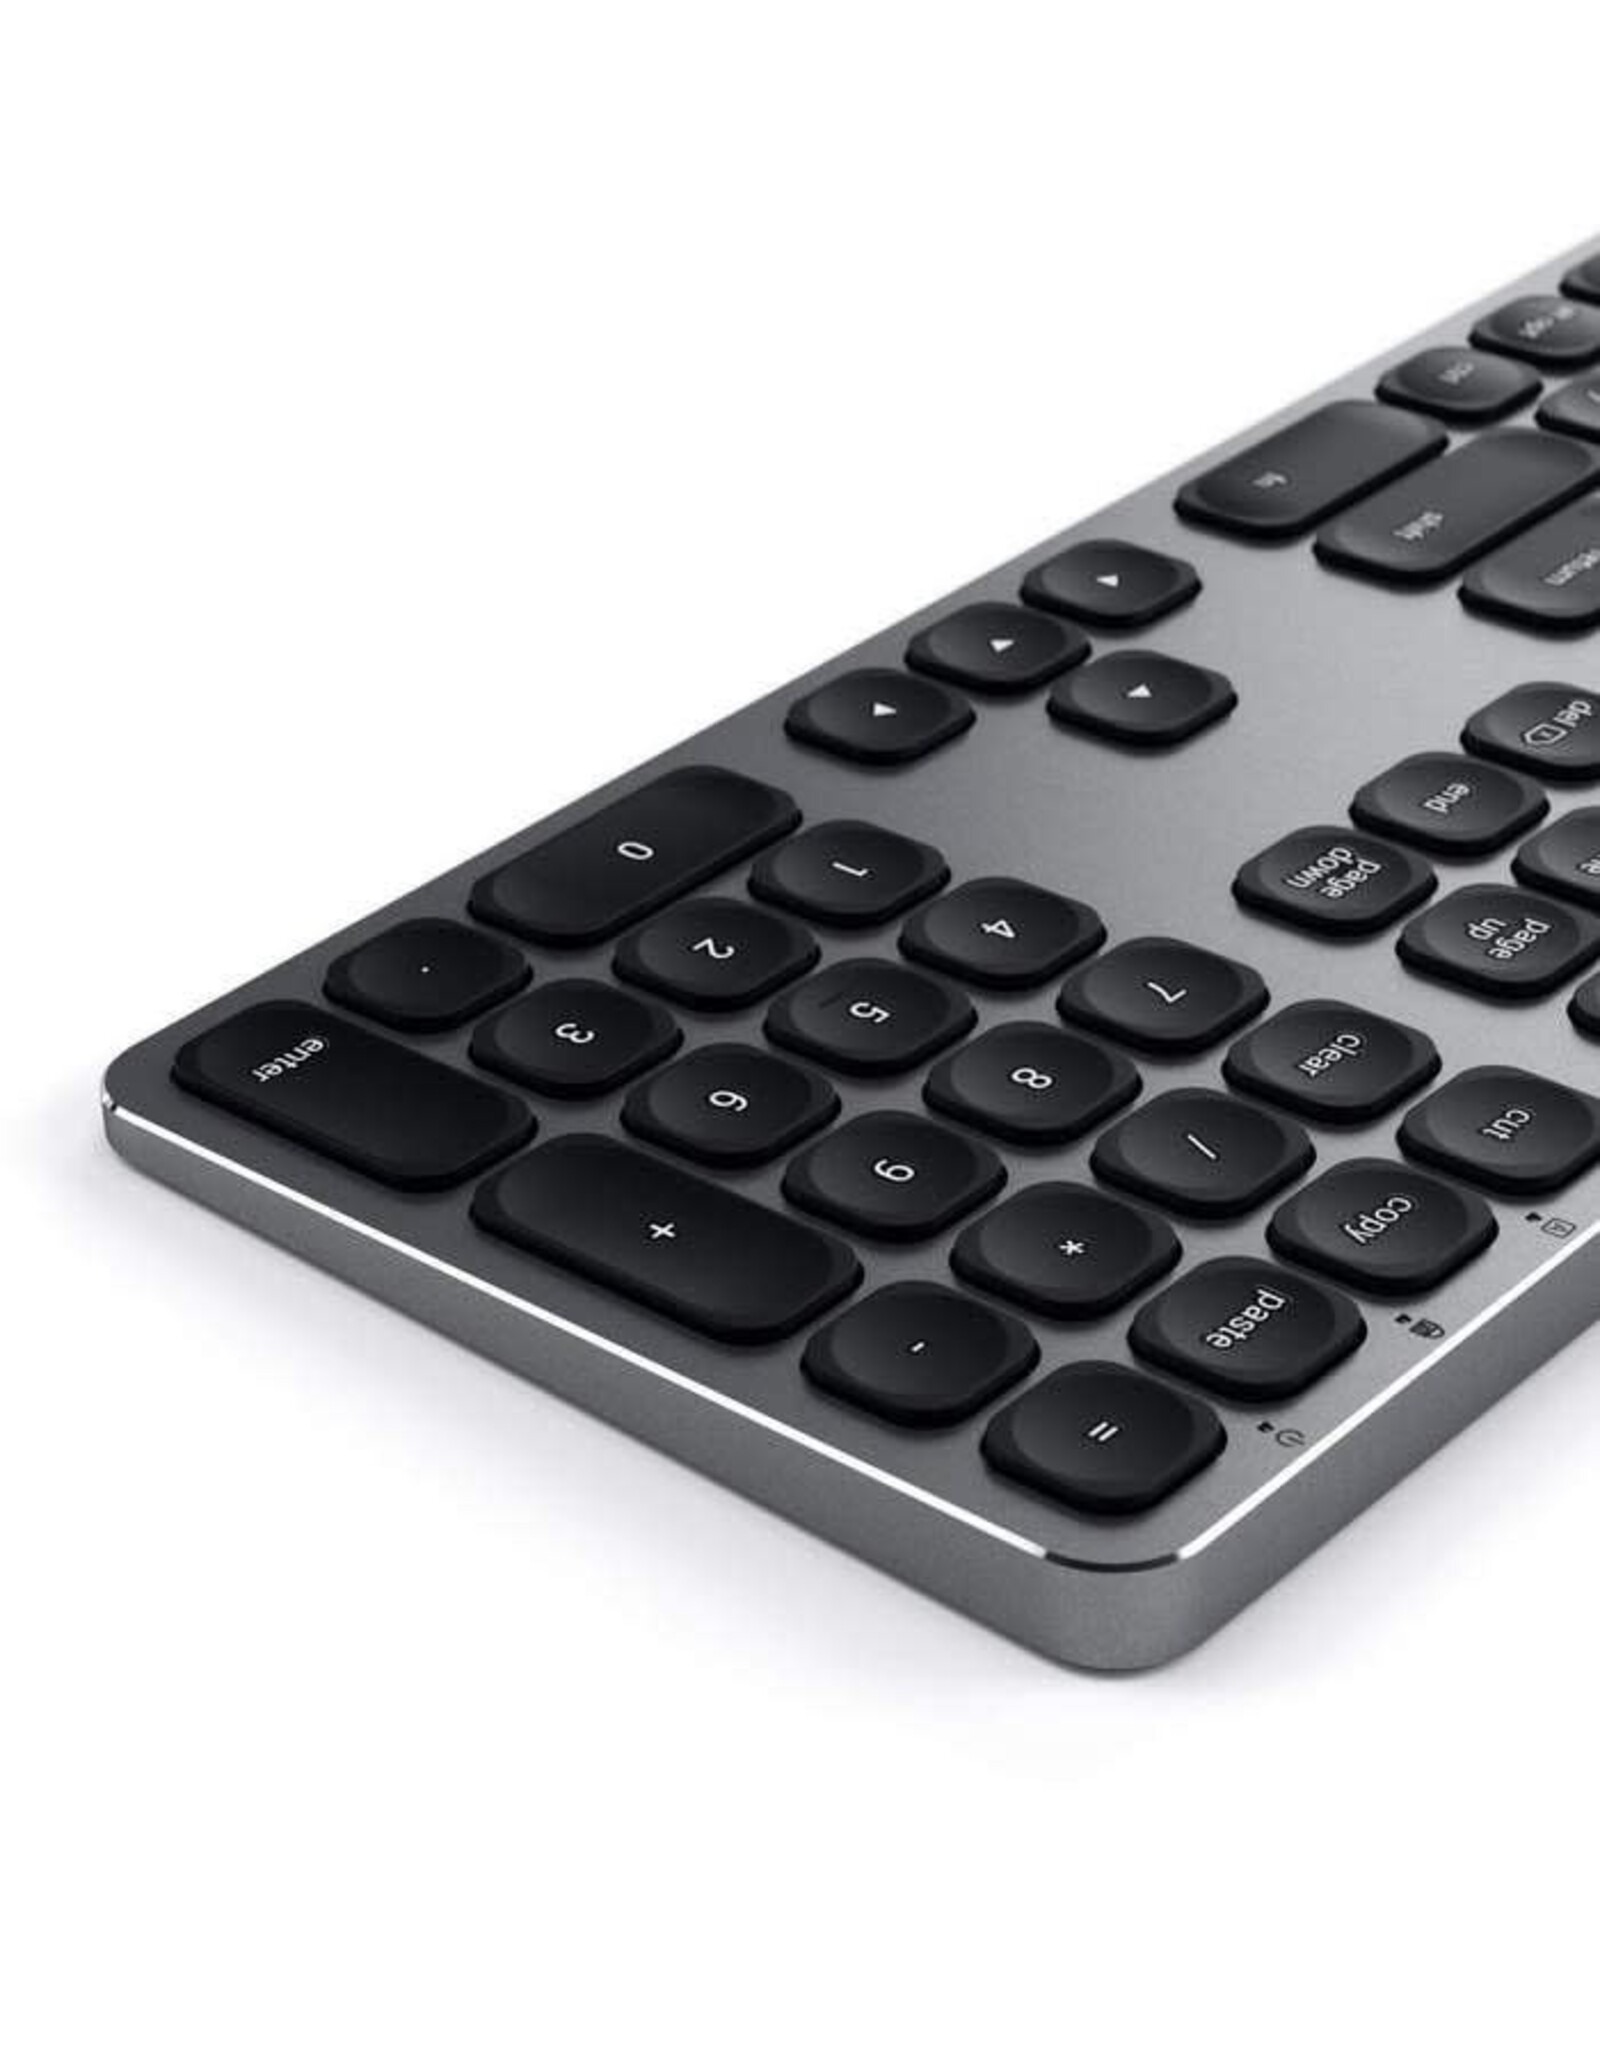 Satechi Satechi Wired Keyboard for Mac Space Grey